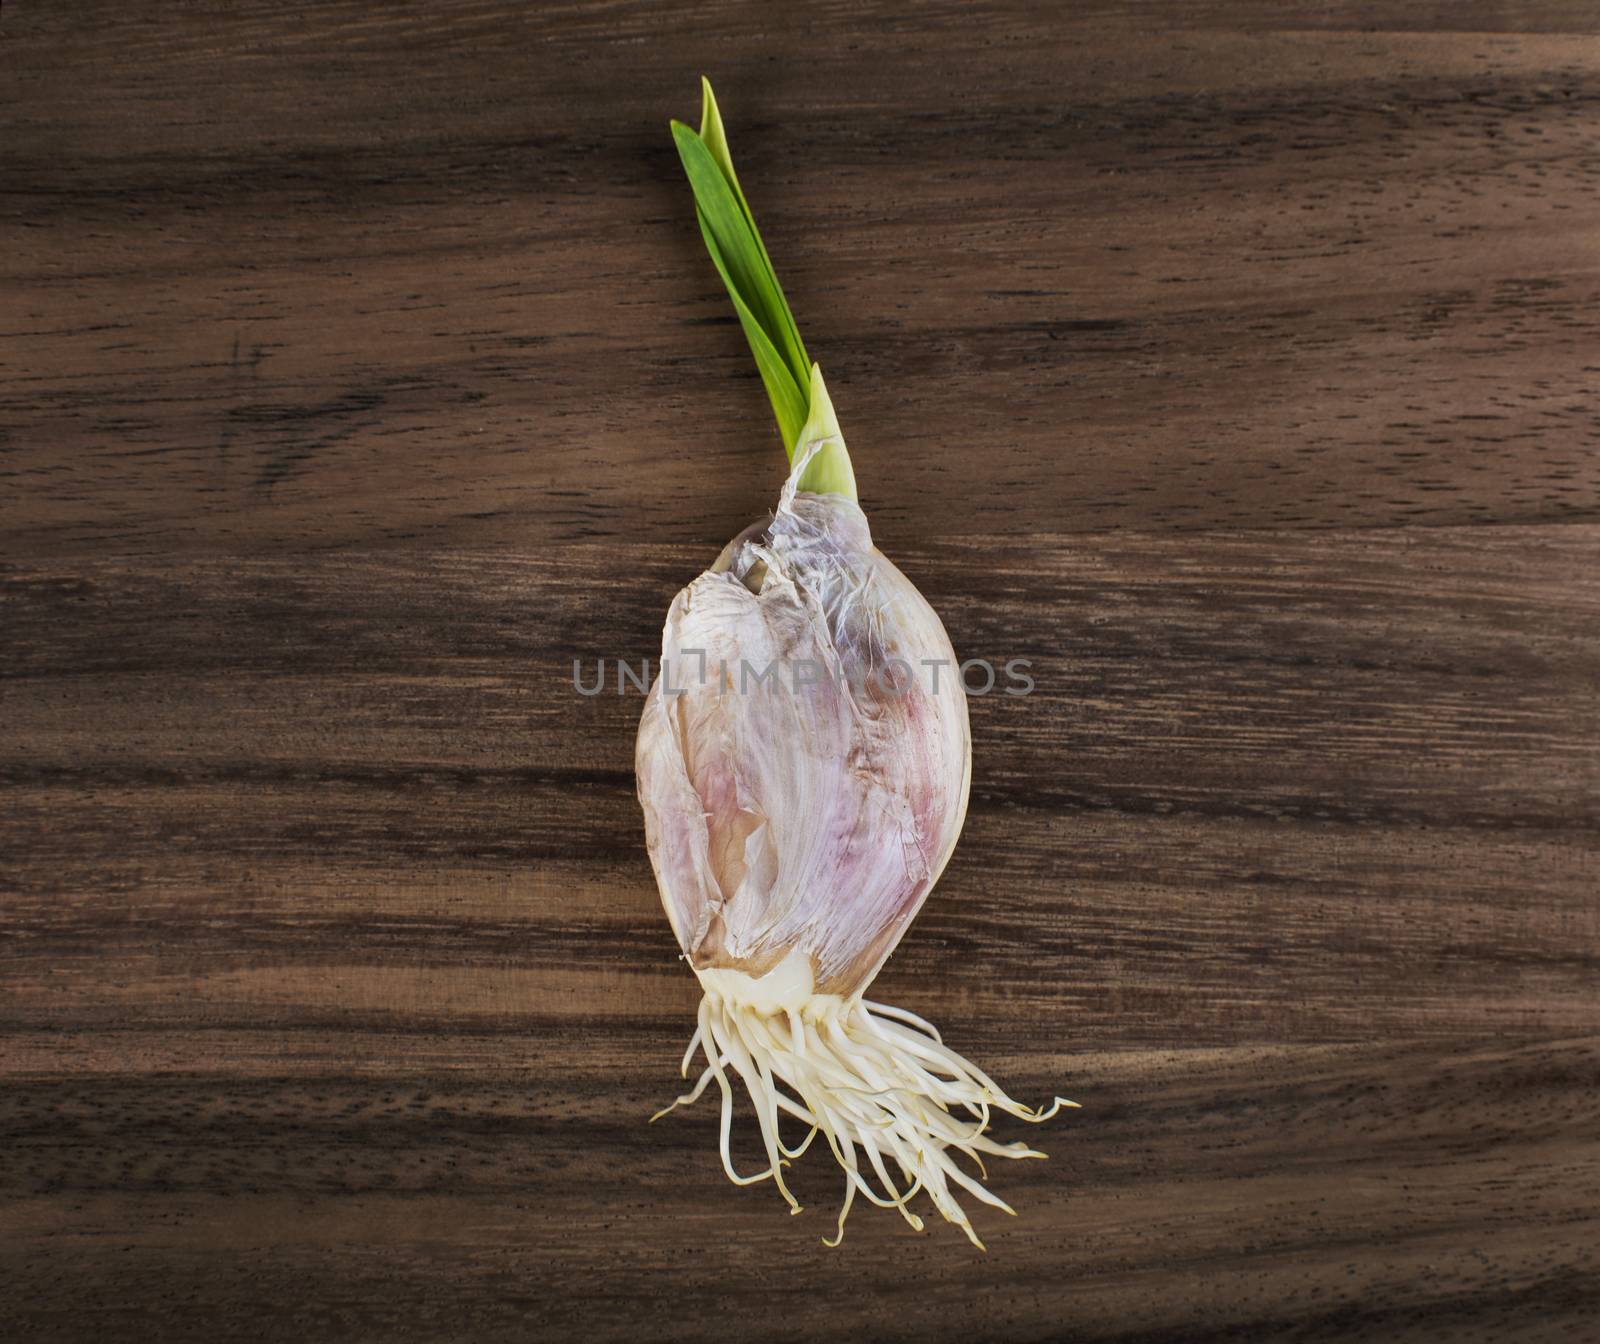 Garlic bulb sprout by rgbspace